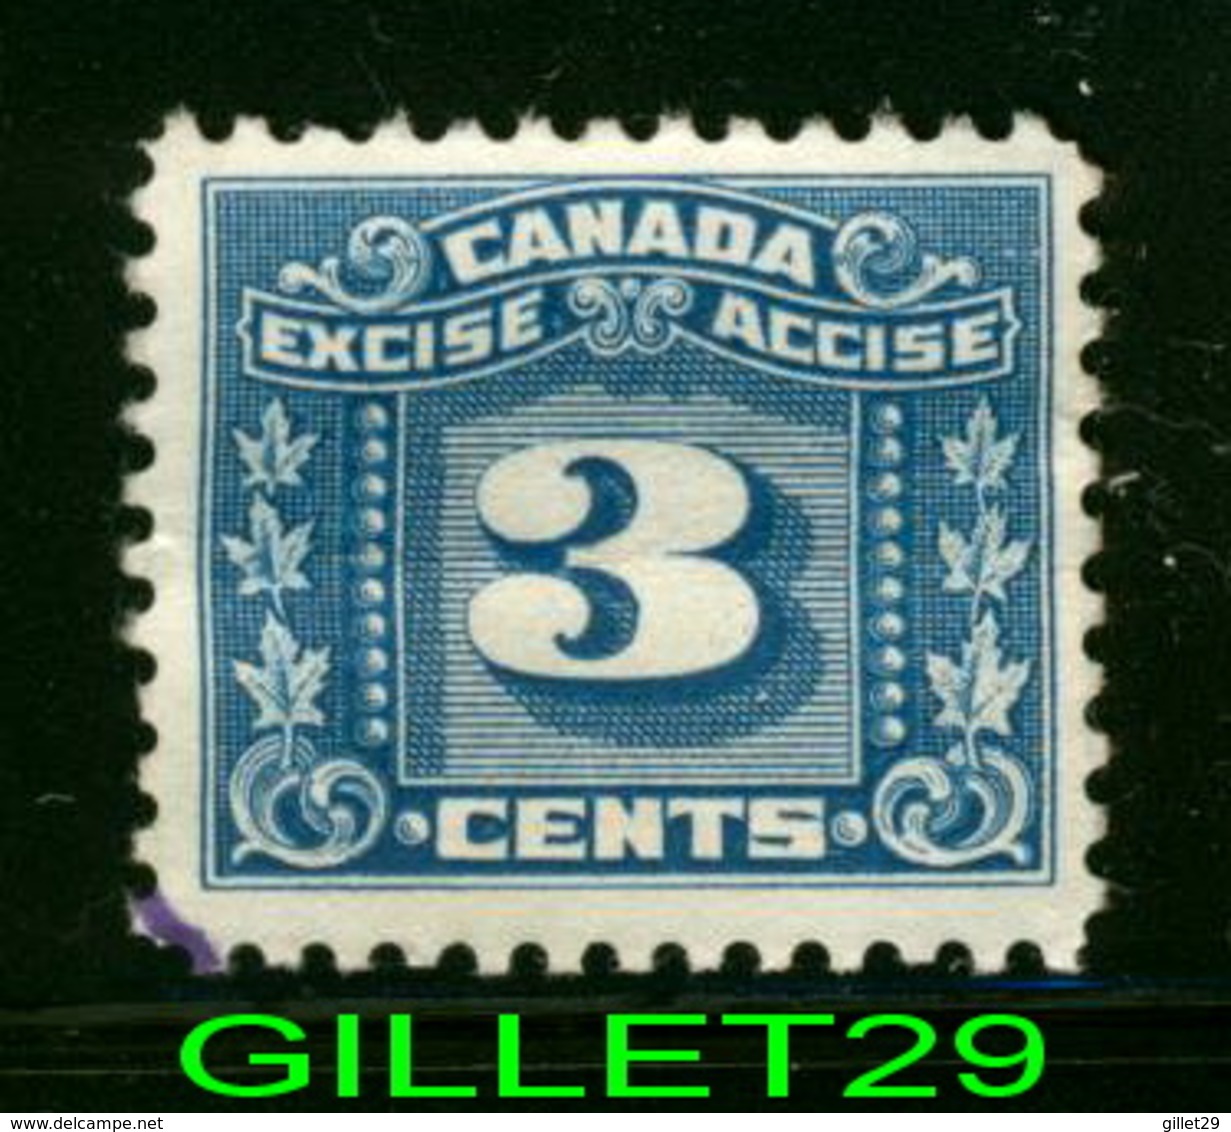 STAMPS - 3 Cents EXCISE ACCISE Revenue Fiscal Tax Postage Due Official Canada - - Postage Due